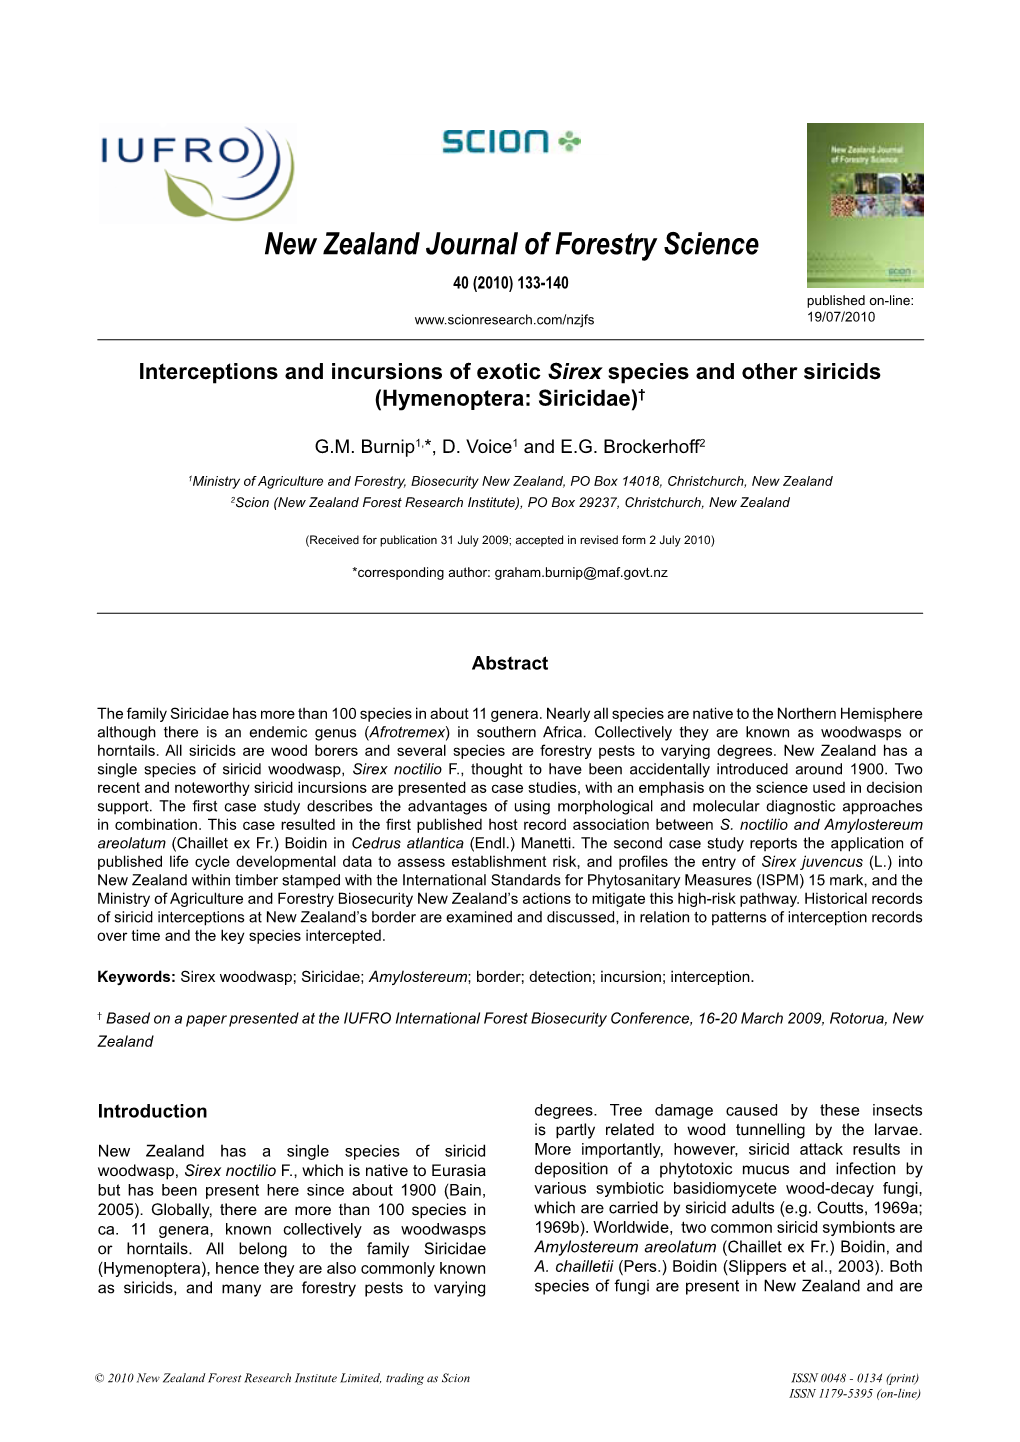 New Zealand Journal of Forestry Science 40 (2010) 133-140 Published On-Line: 19/07/2010